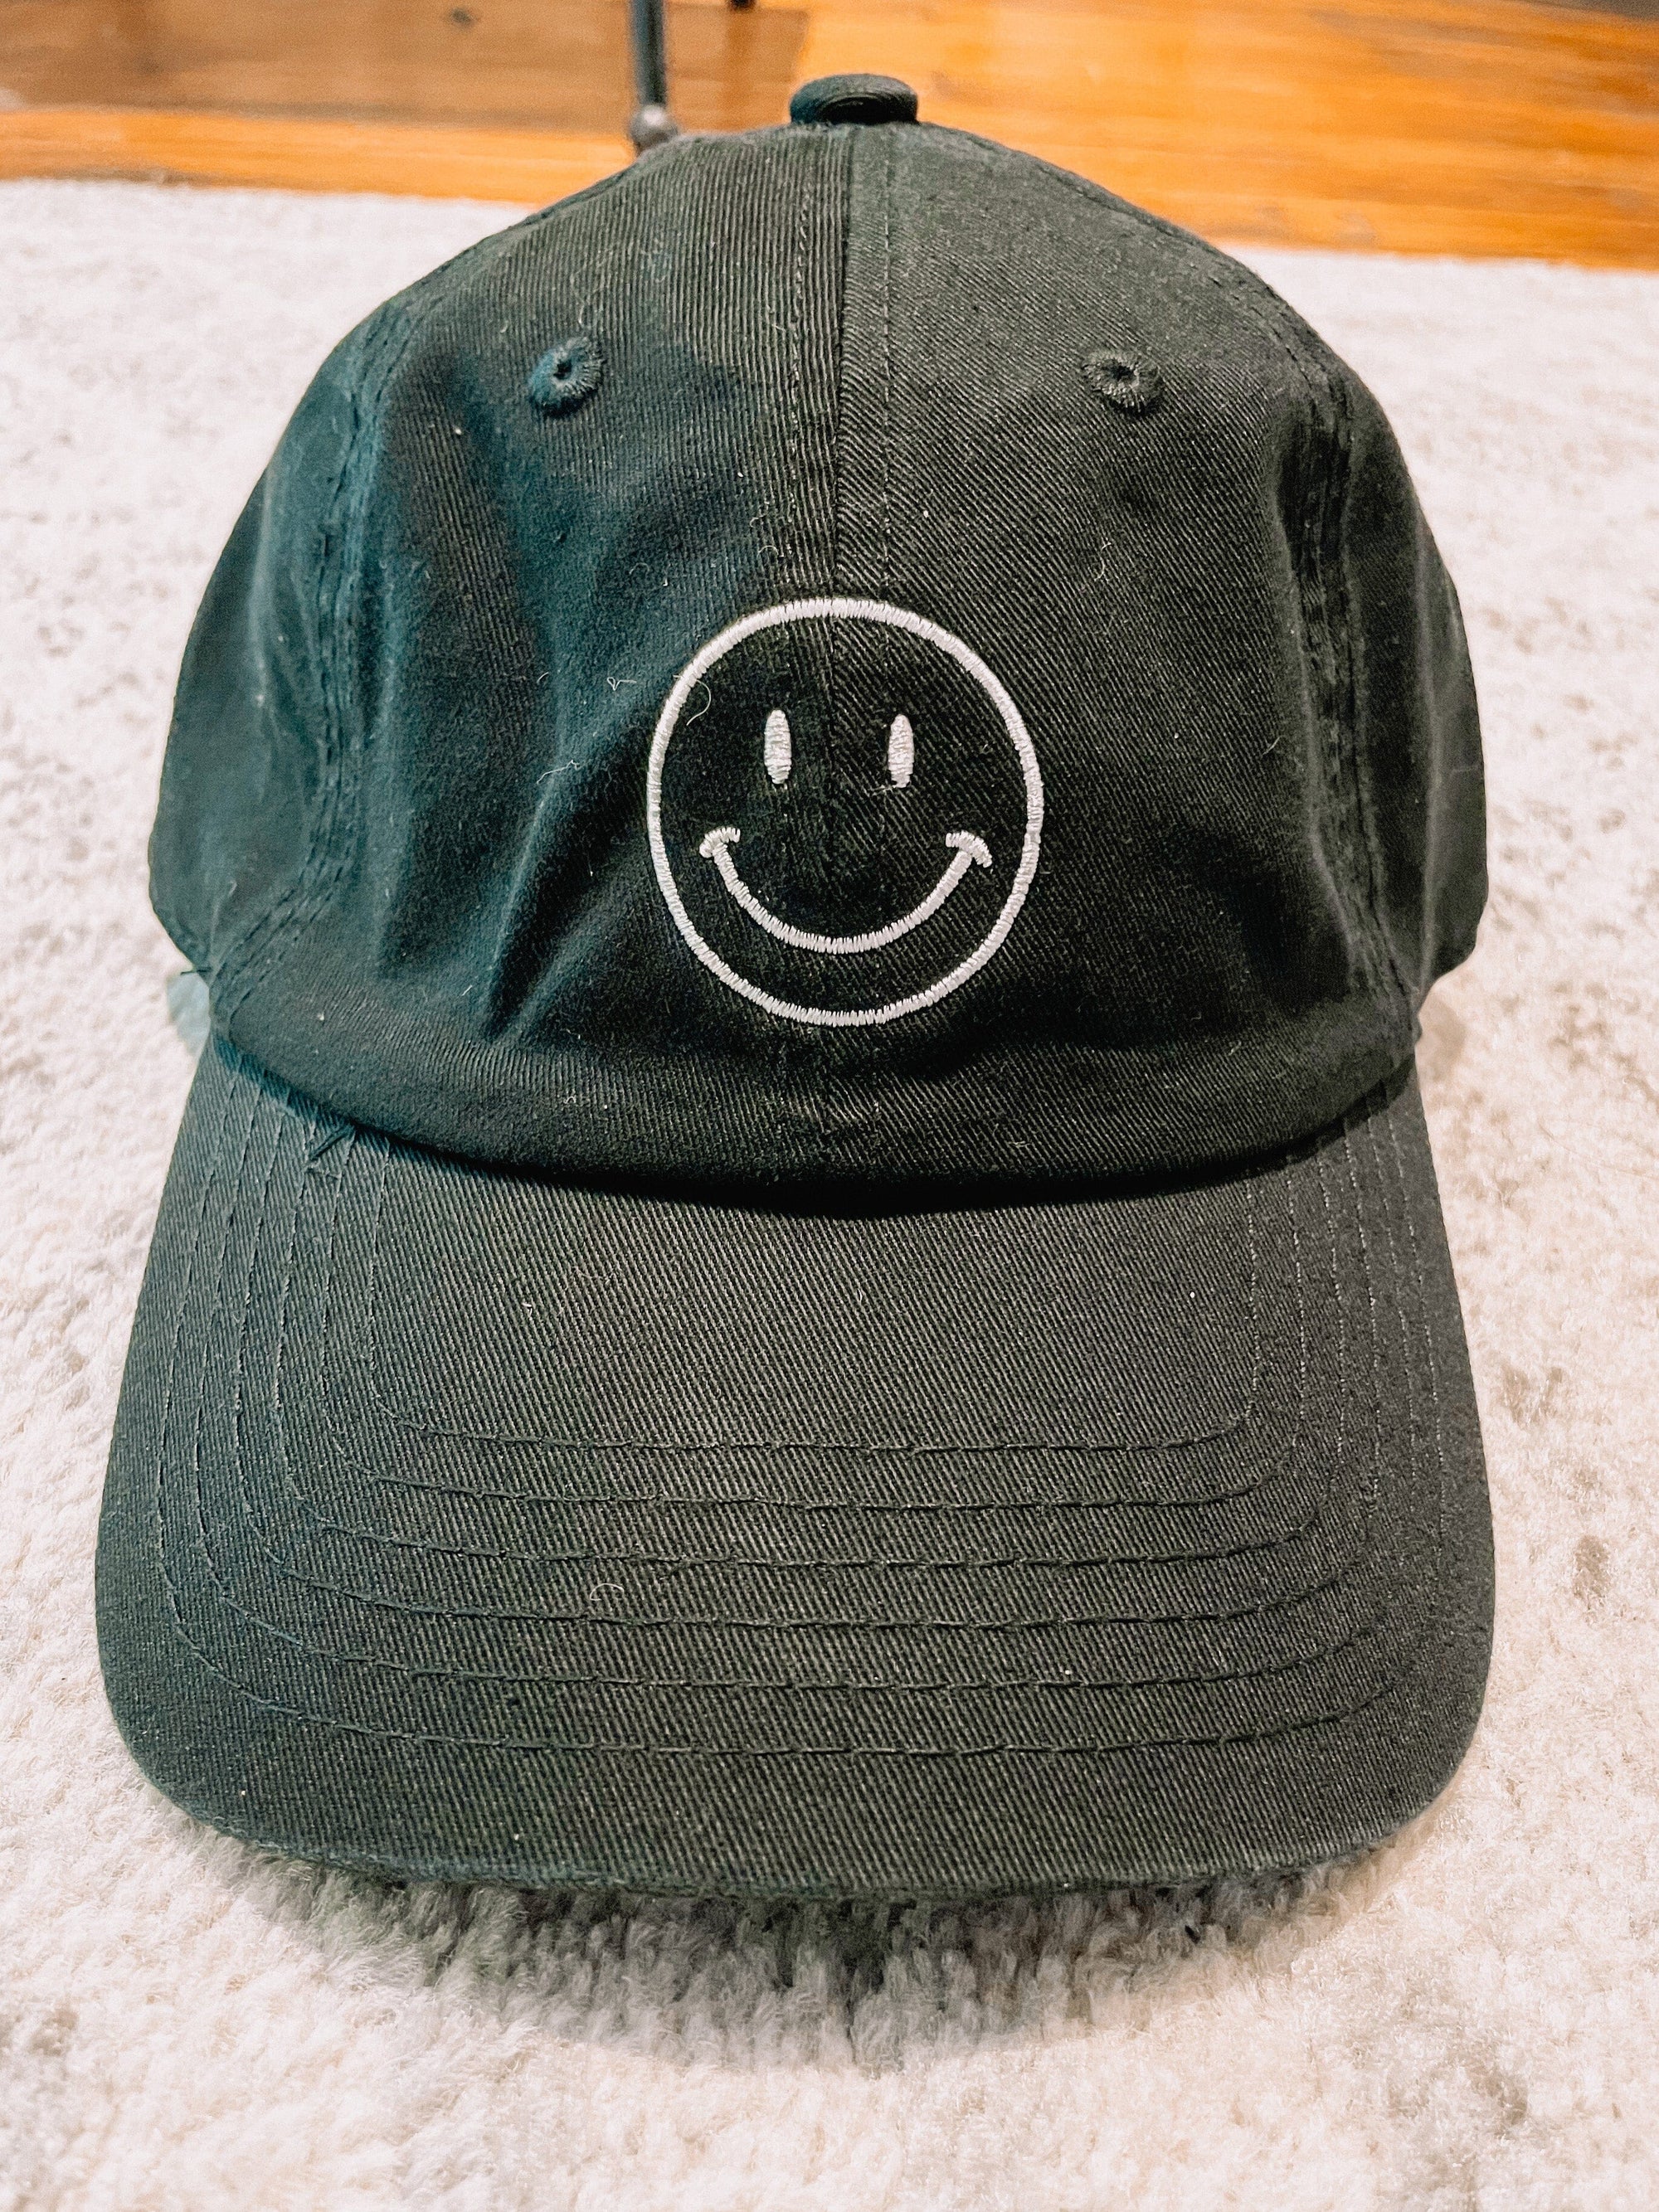 Smiley Embroidered Ball Cap Hats Stitch Lane Black 